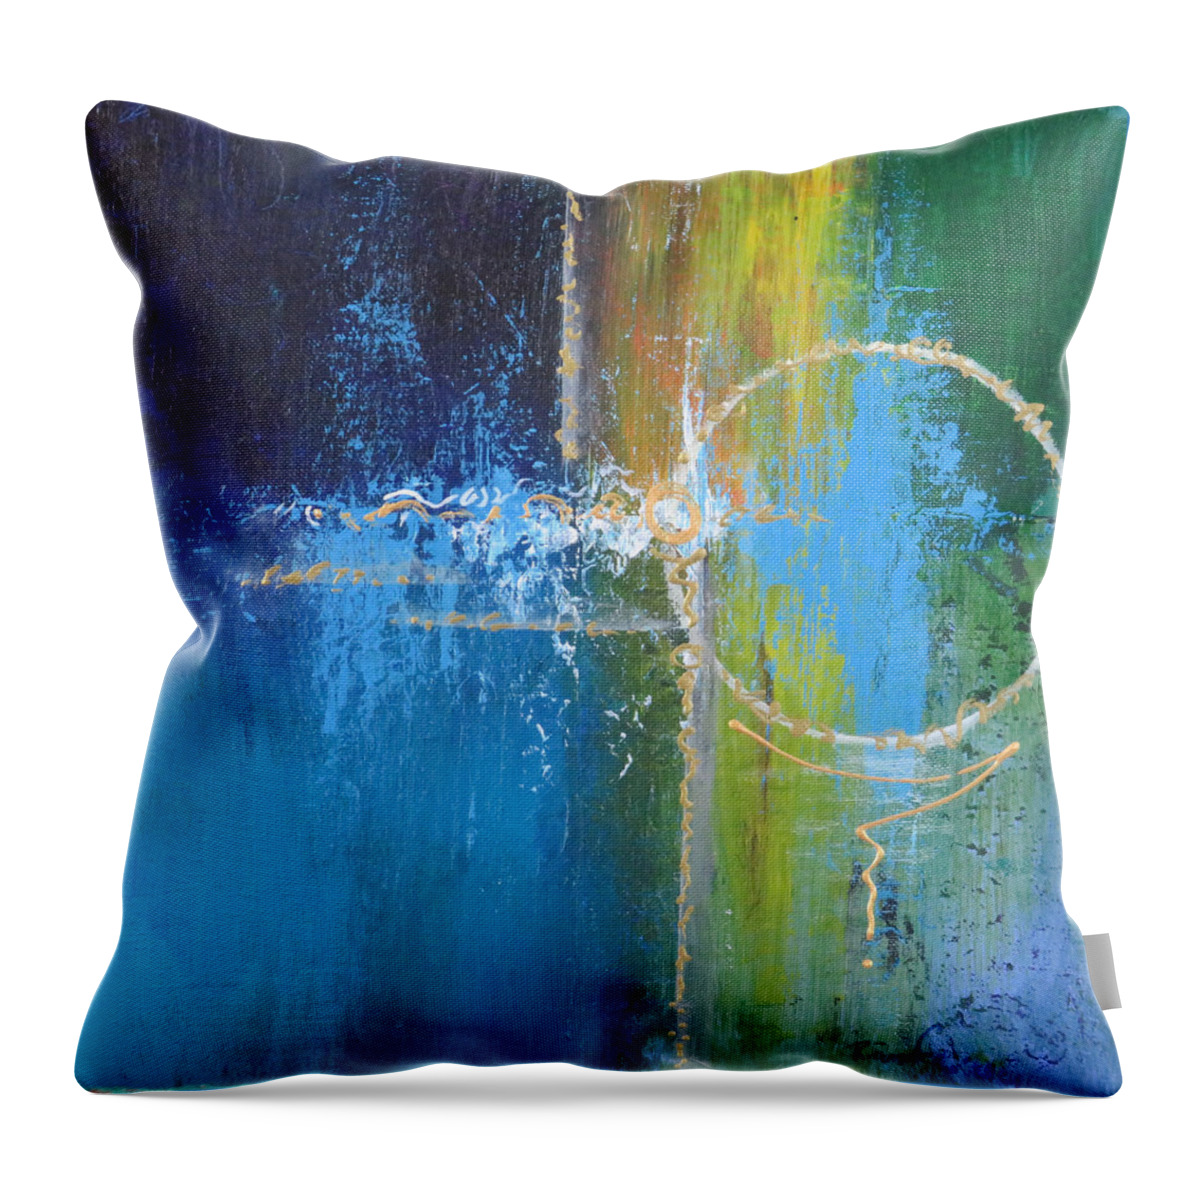 Abstract Throw Pillow featuring the painting Galactalinguatic by Raymond Fernandez